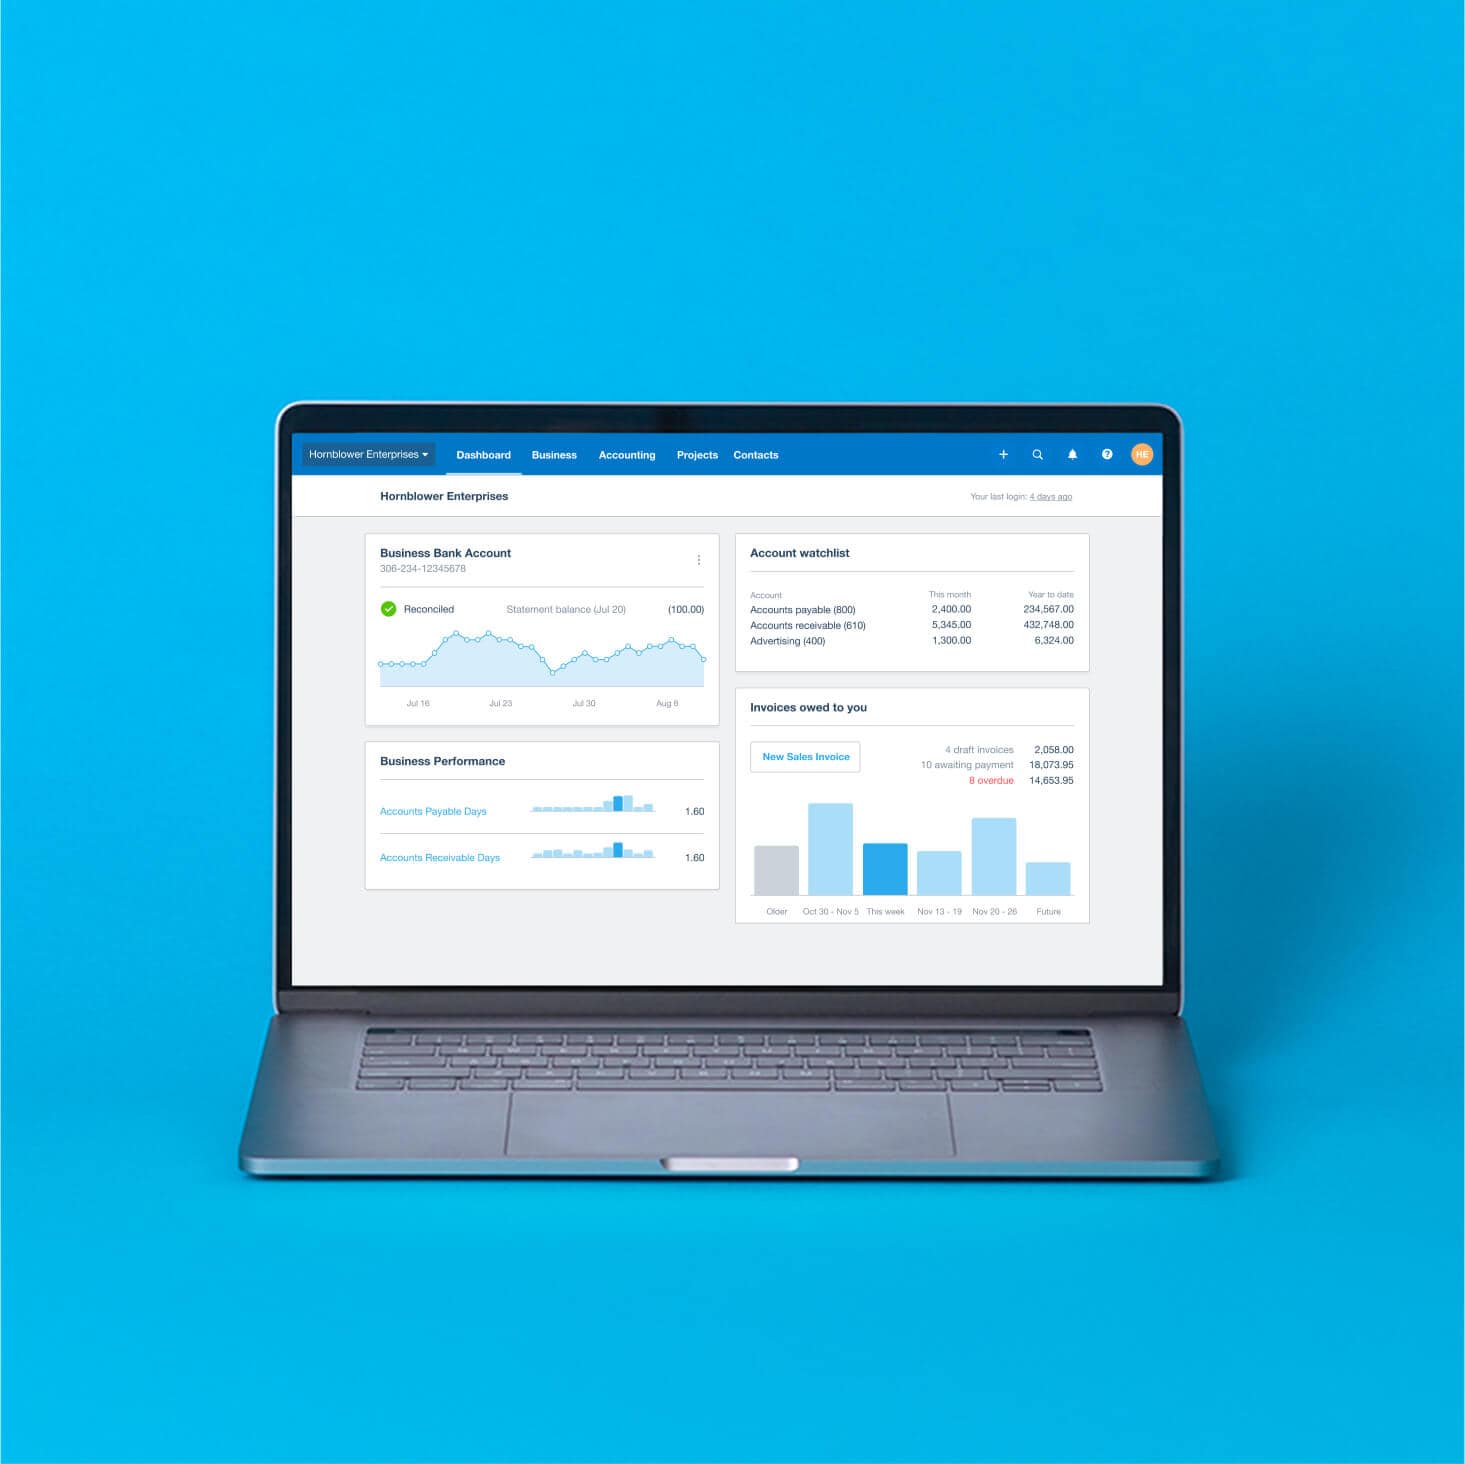 The Xero accounting dashboard displays charts and graphs that give an overview of a startup’s financial performance.